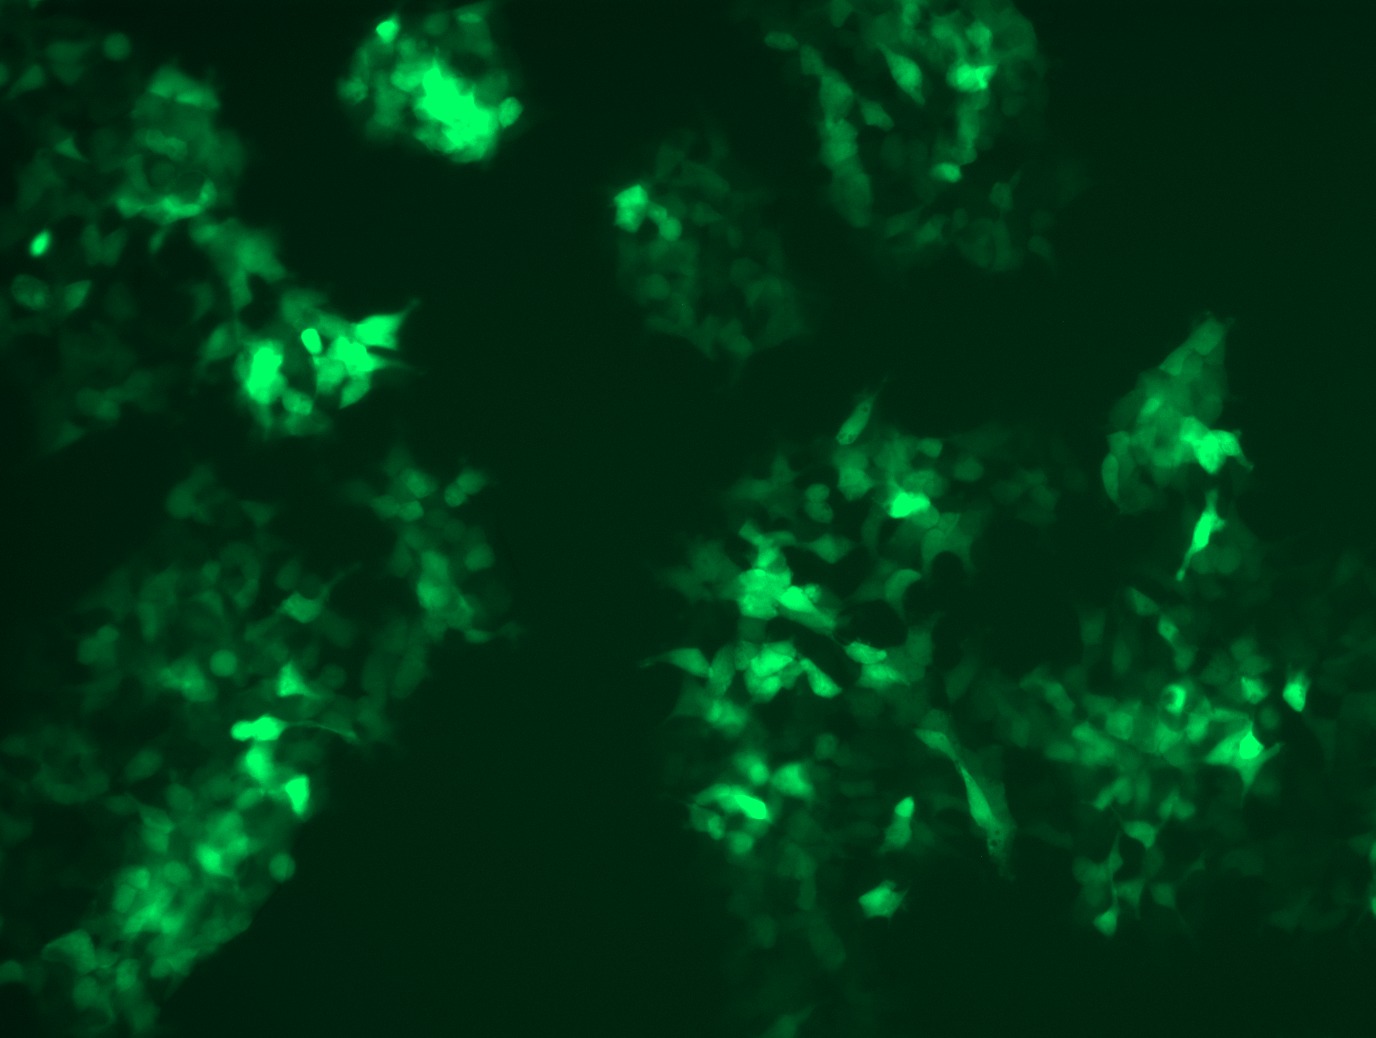 GFP signal was observed under microscope at 48 hours after transduction of TL303133A virus into HEK293 cells. TL303133A virus was prepared using lenti-shRNA TL303133A and TR30037 packaging kit.